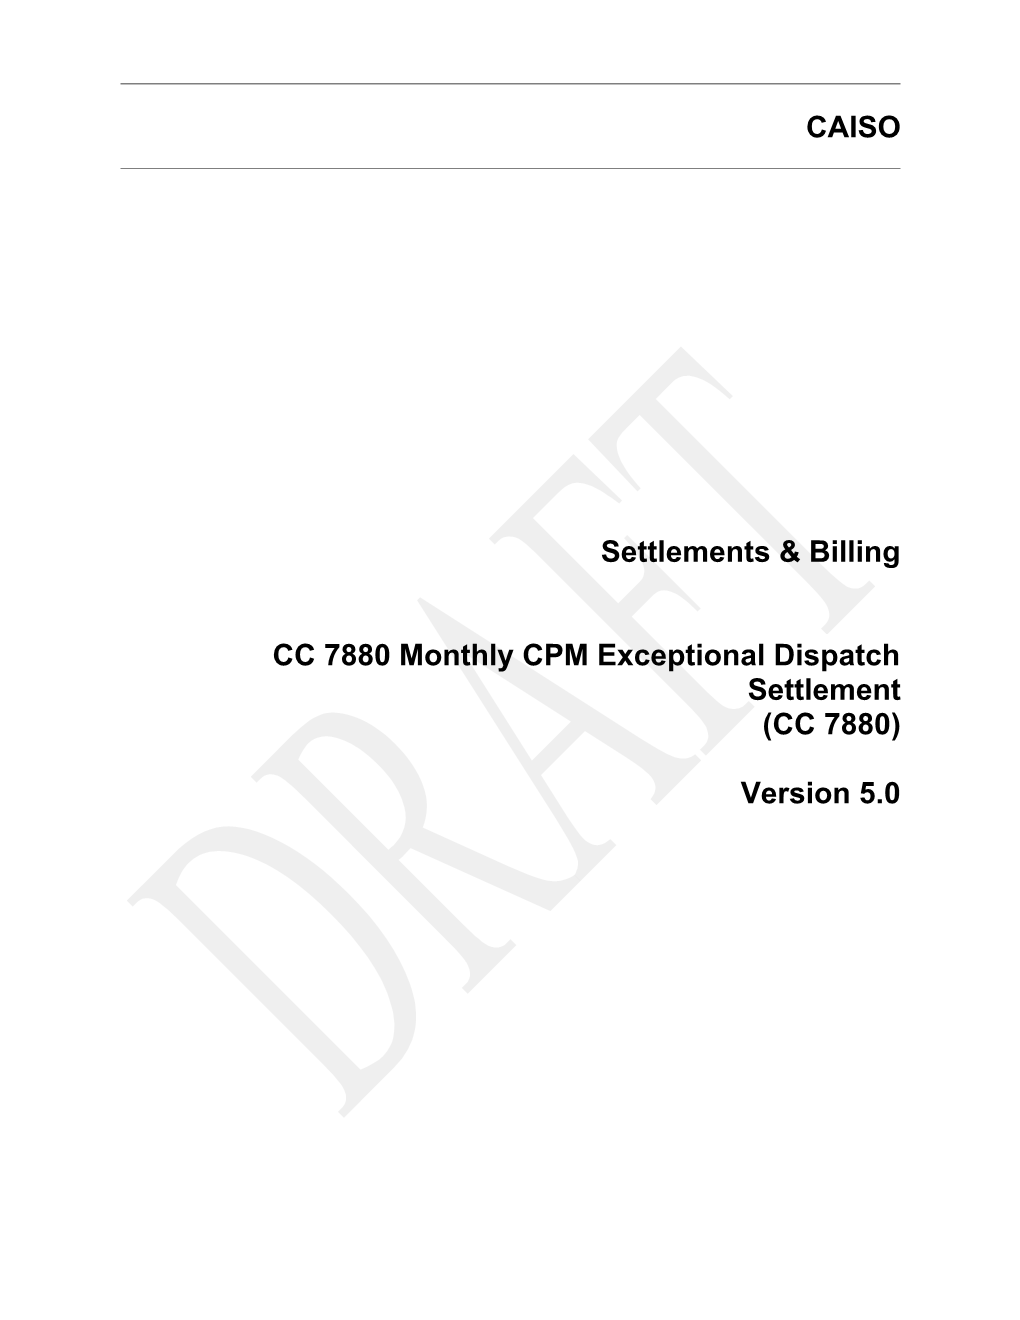 CC 7880 Monthly CPM Exceptional Dispatch Settlement